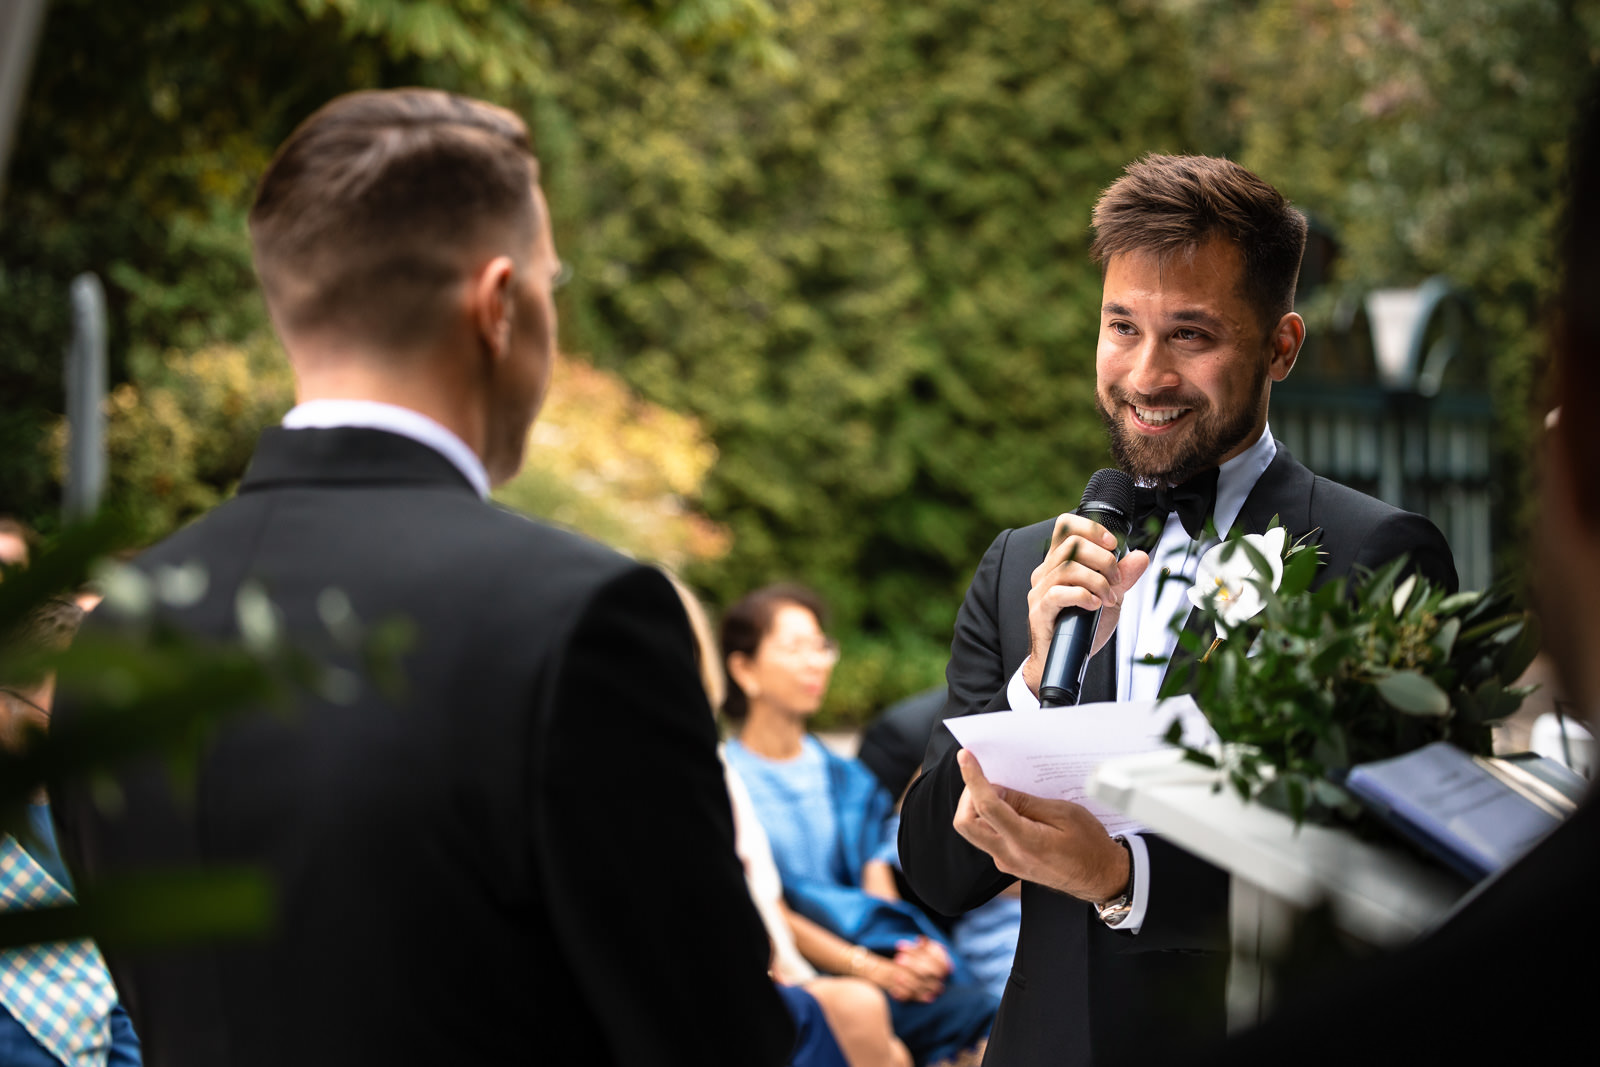 Same sex wedding groom vows during the wedding ceremony